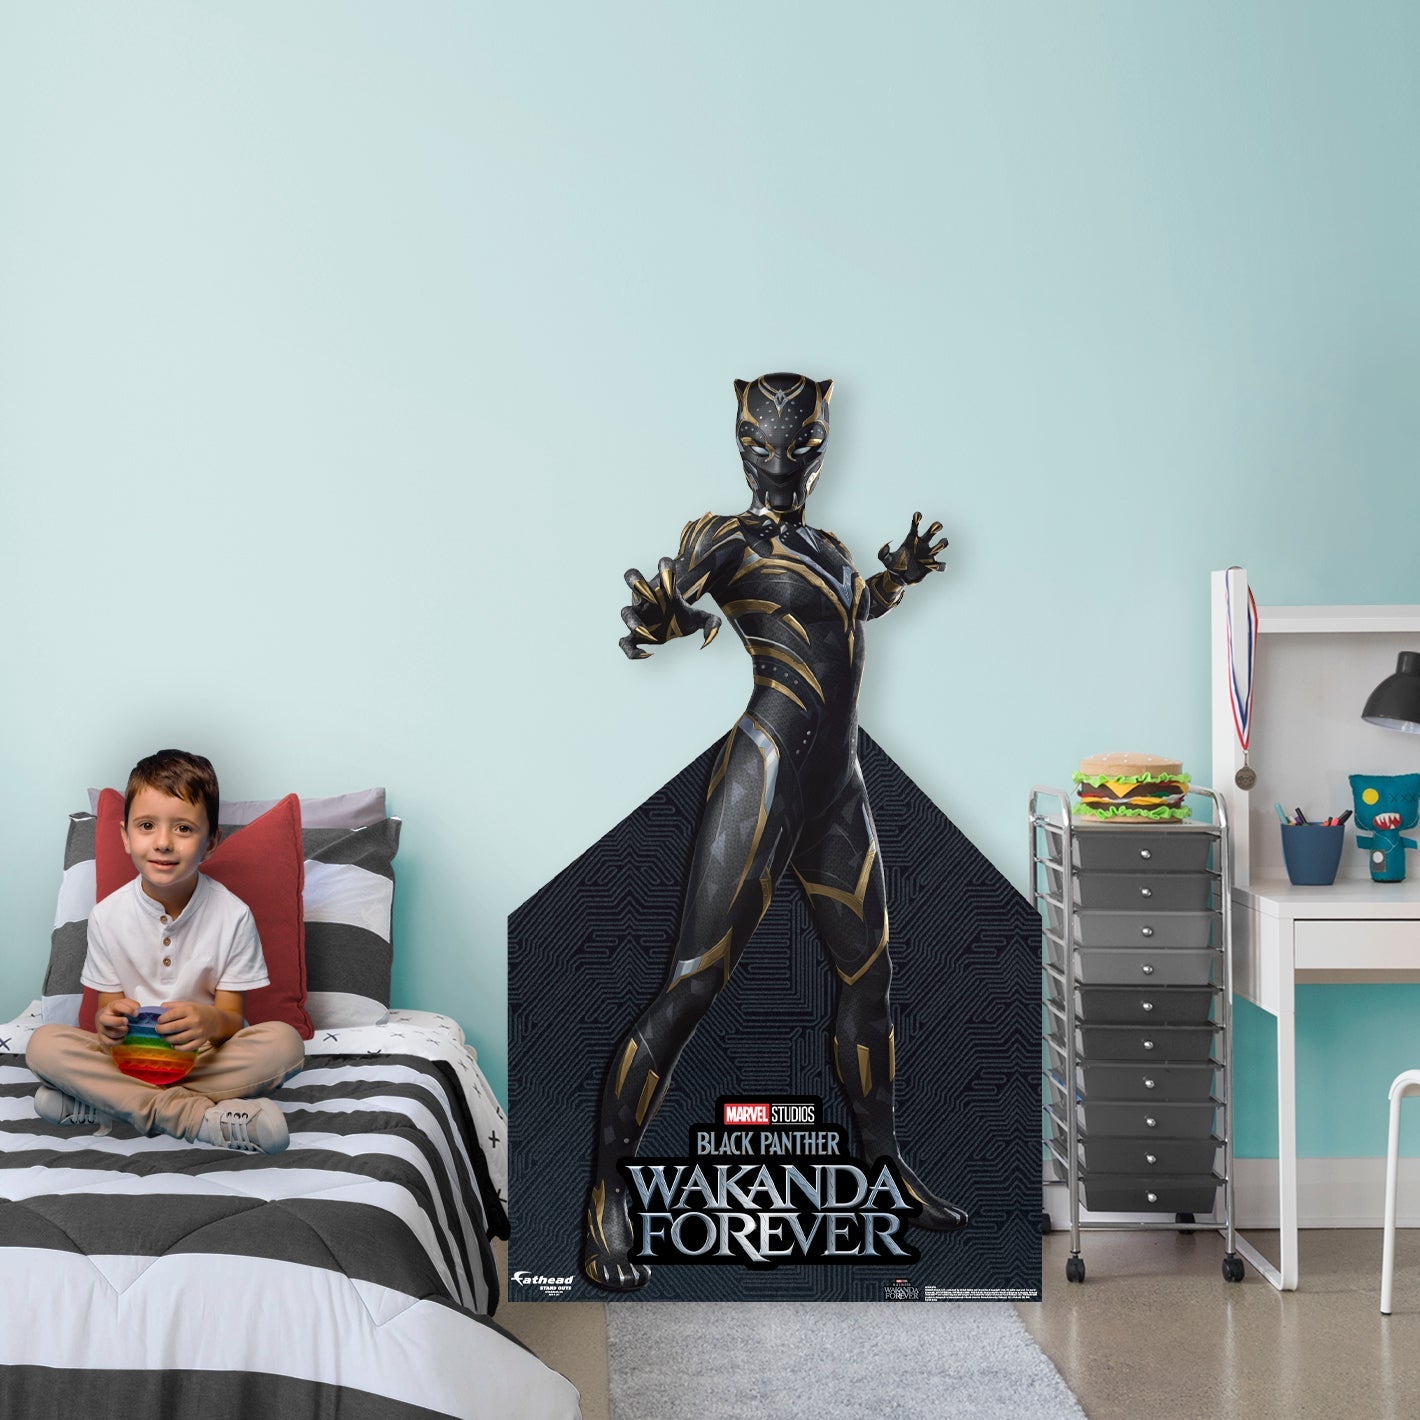 Black Panther Wakanda Forever: Black Panther Life-Size Foam Core Cutout - Officially Licensed Marvel Stand Out